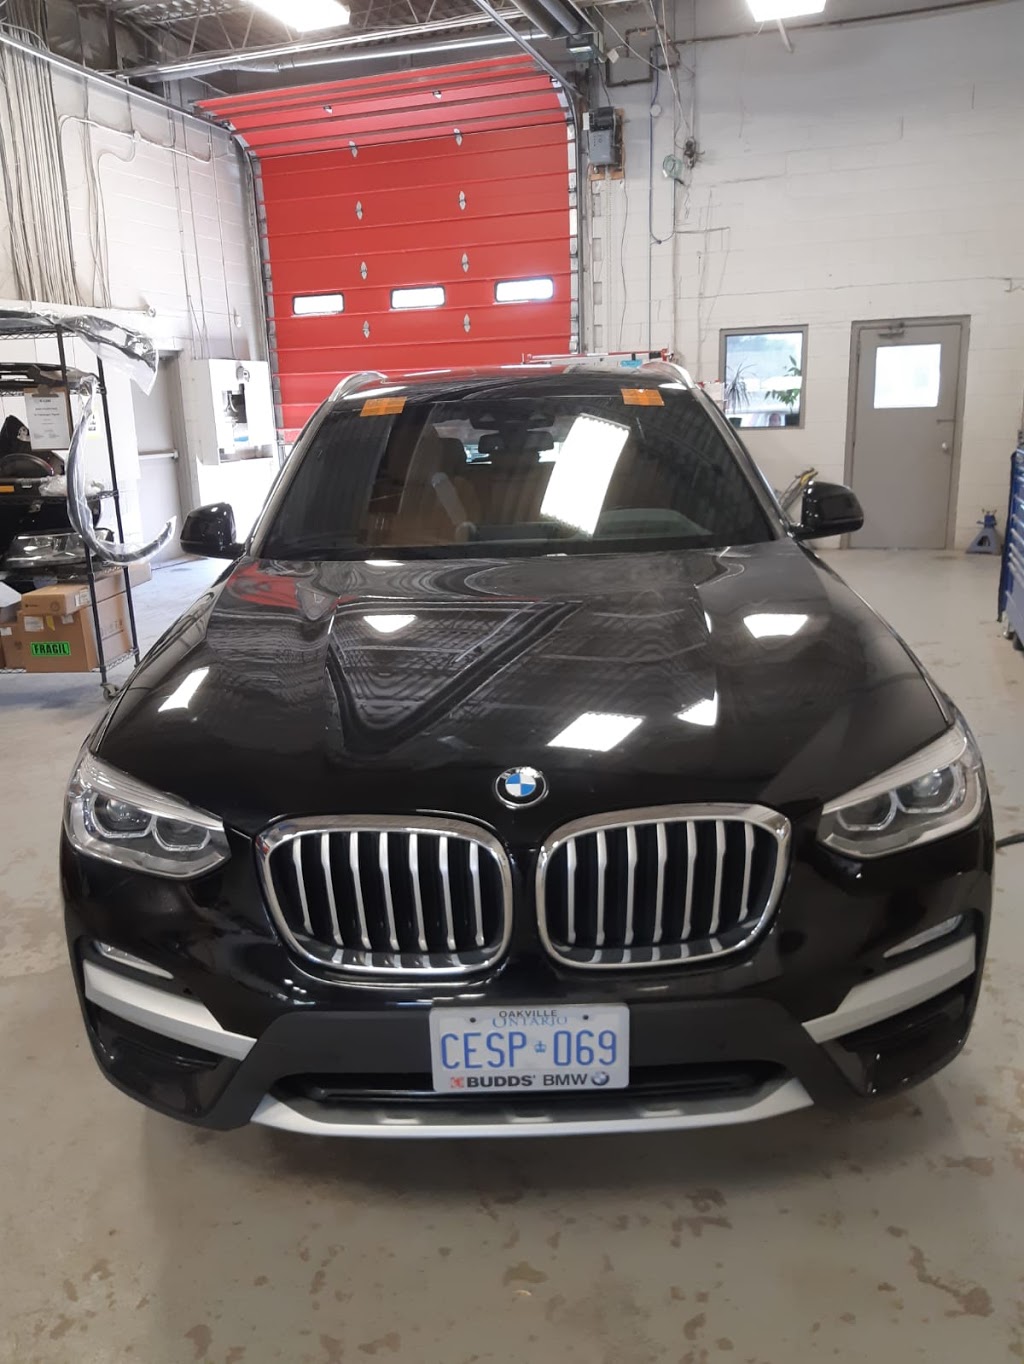 Canadian Auto Glass Pros | car repair | 434 Simcoe St S, Oshawa, ON L1H 4J6, Canada | 9054312636 OR +1 905-431-2636